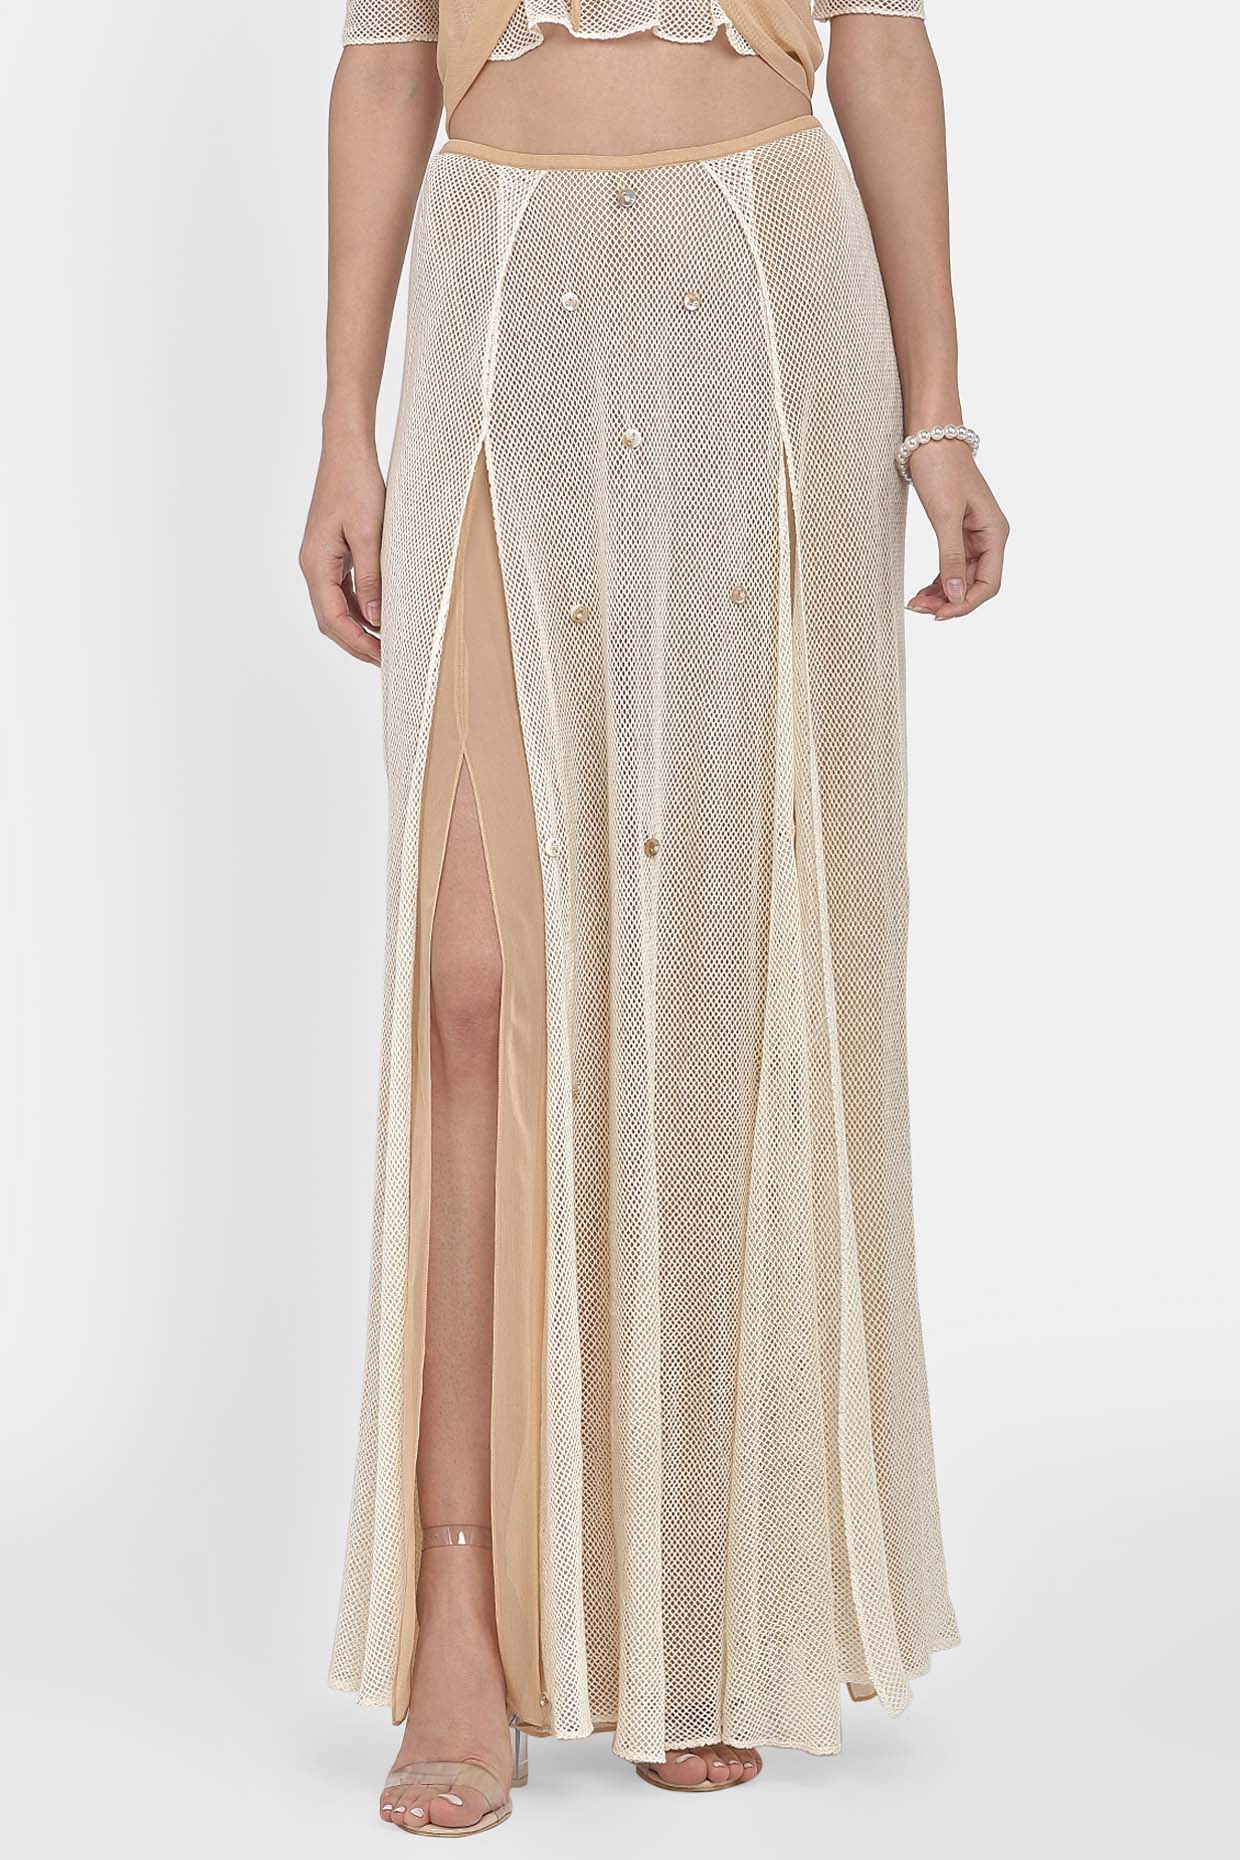 Off White Mesh Crop Top & Slit Pant Skirt With Embellishments